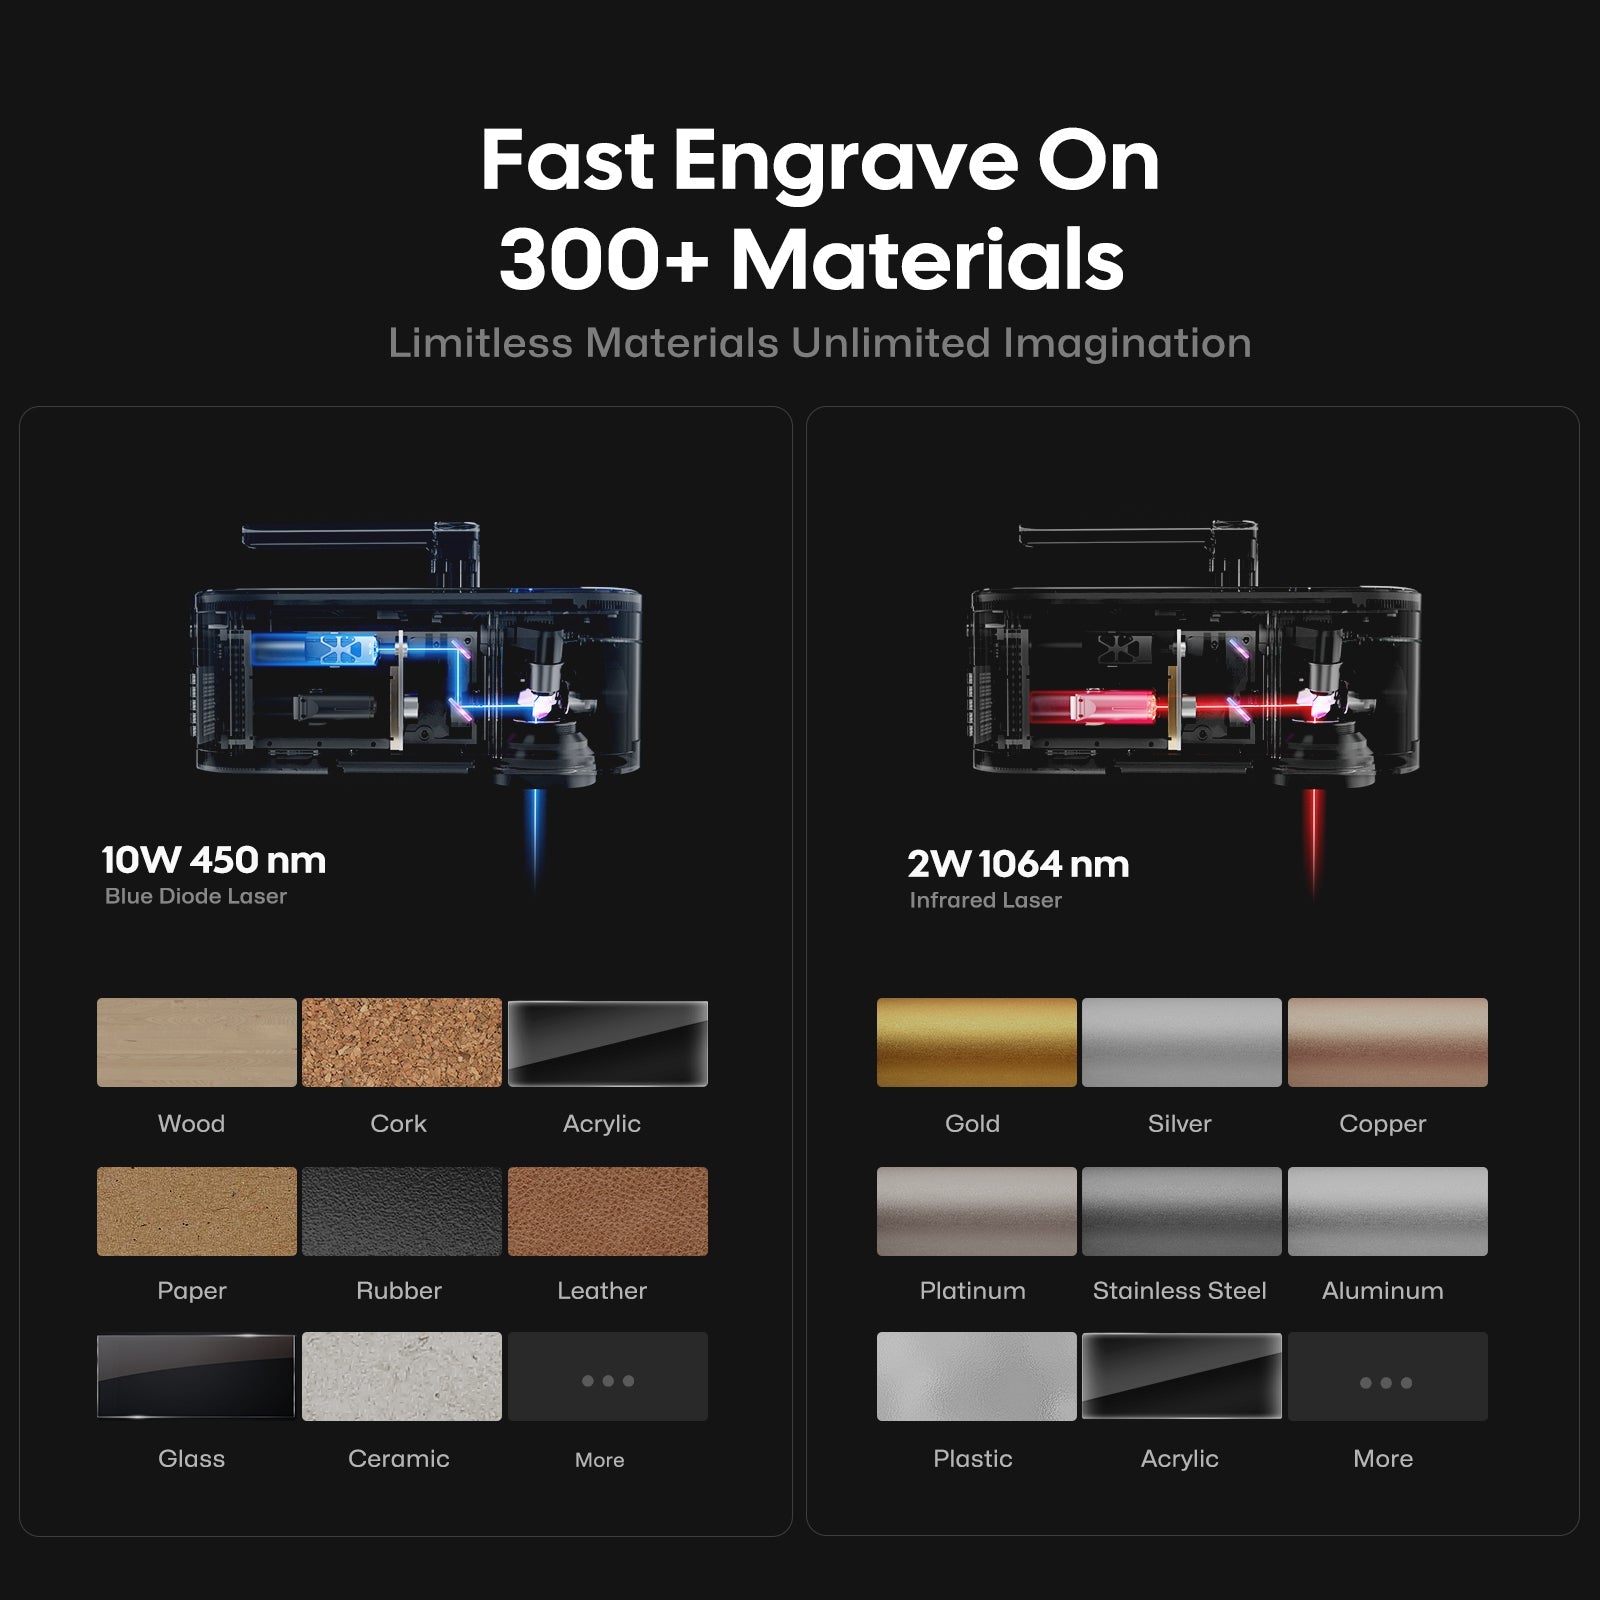 Fast engrave on 300+ material types